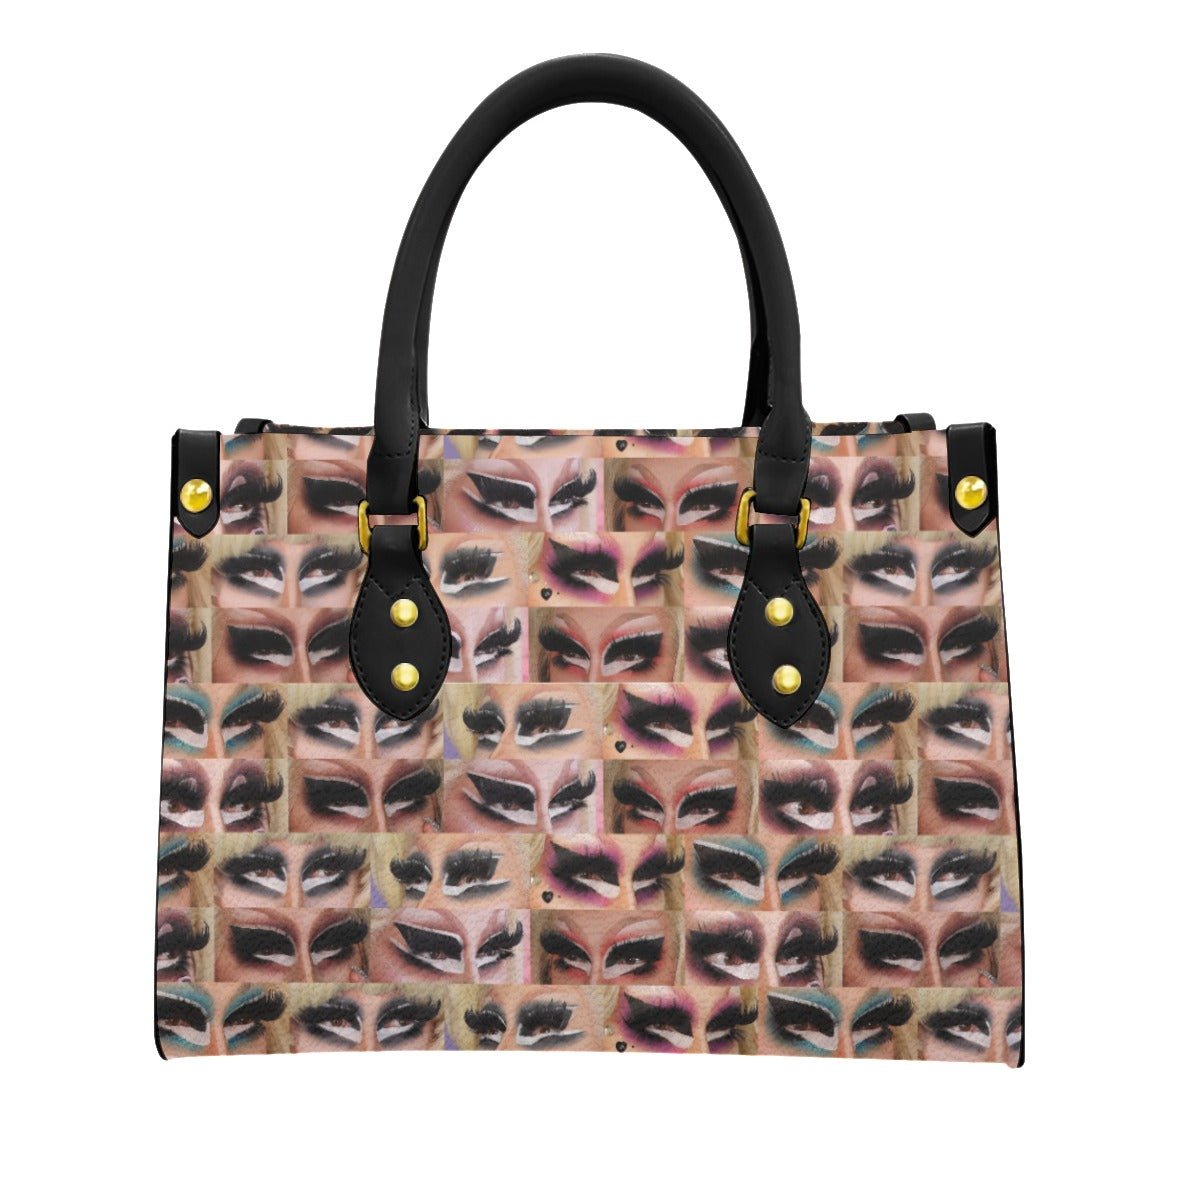 Women's Tote Bag With Black Handle - dragqueenmerch